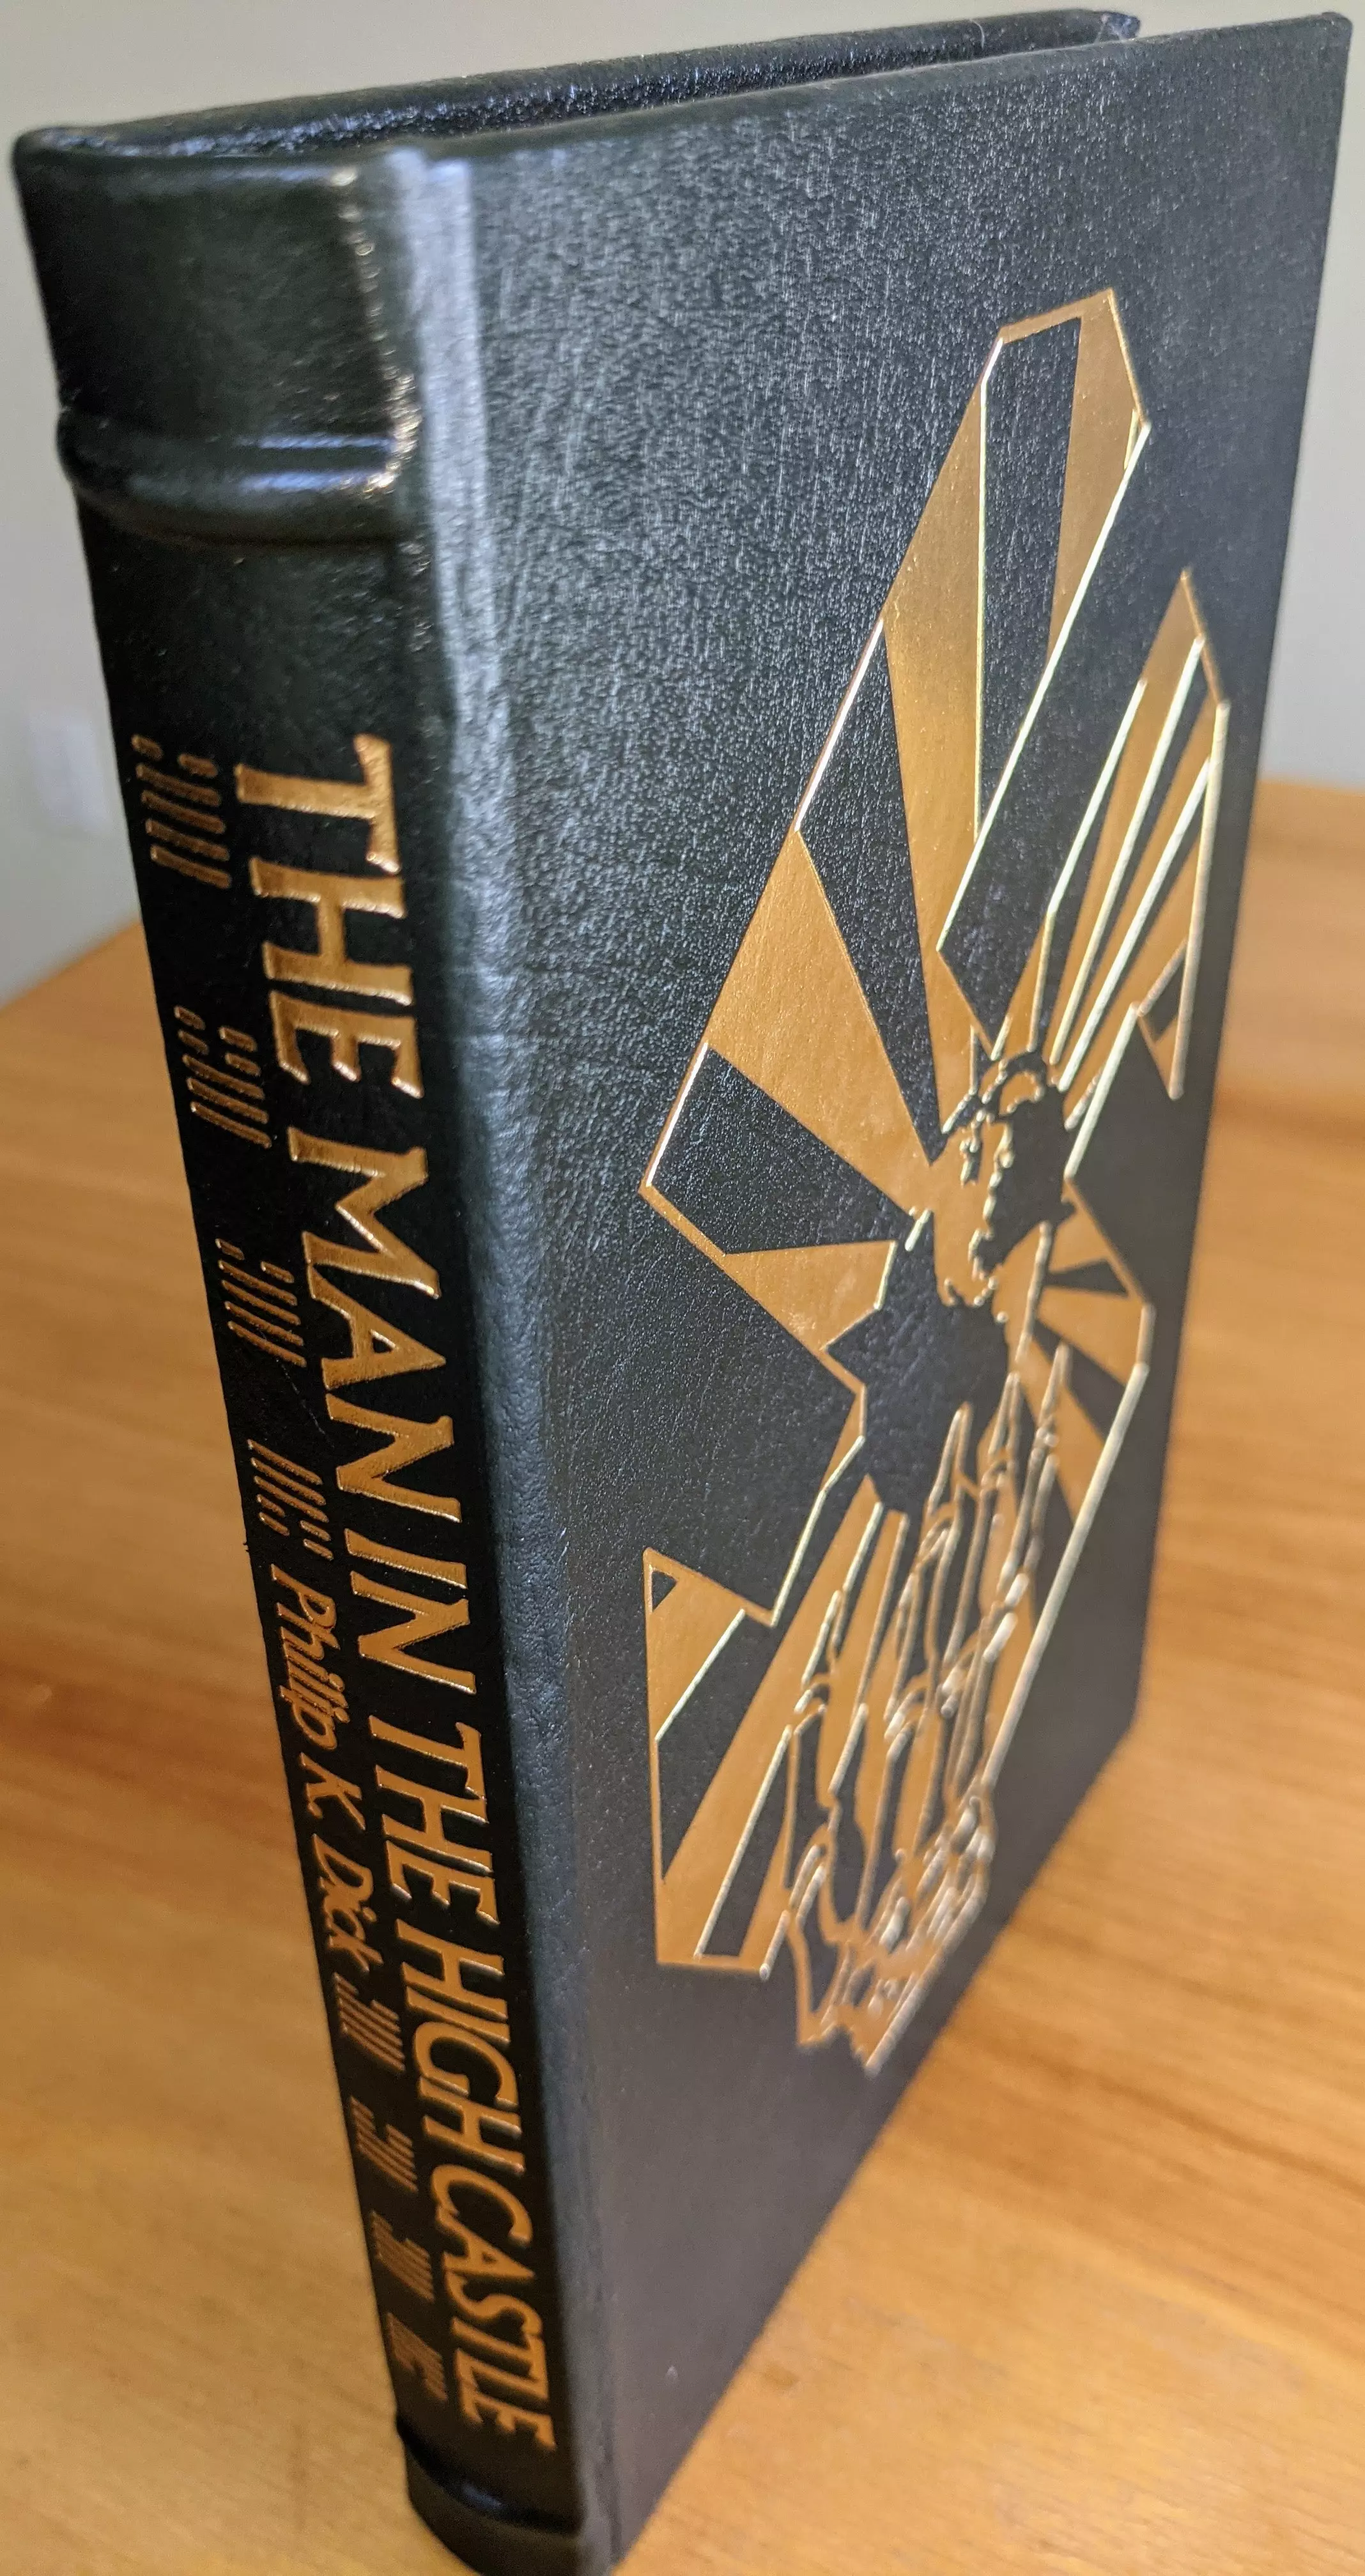 Stunning Dark Green Leather Bound hardback book with hubbed spine, cover artwork in 22kt gold, printed on archival paper with gold gilded edges, smyth sewing & concealed muslin joints
	  - original artwork by Richard Powers